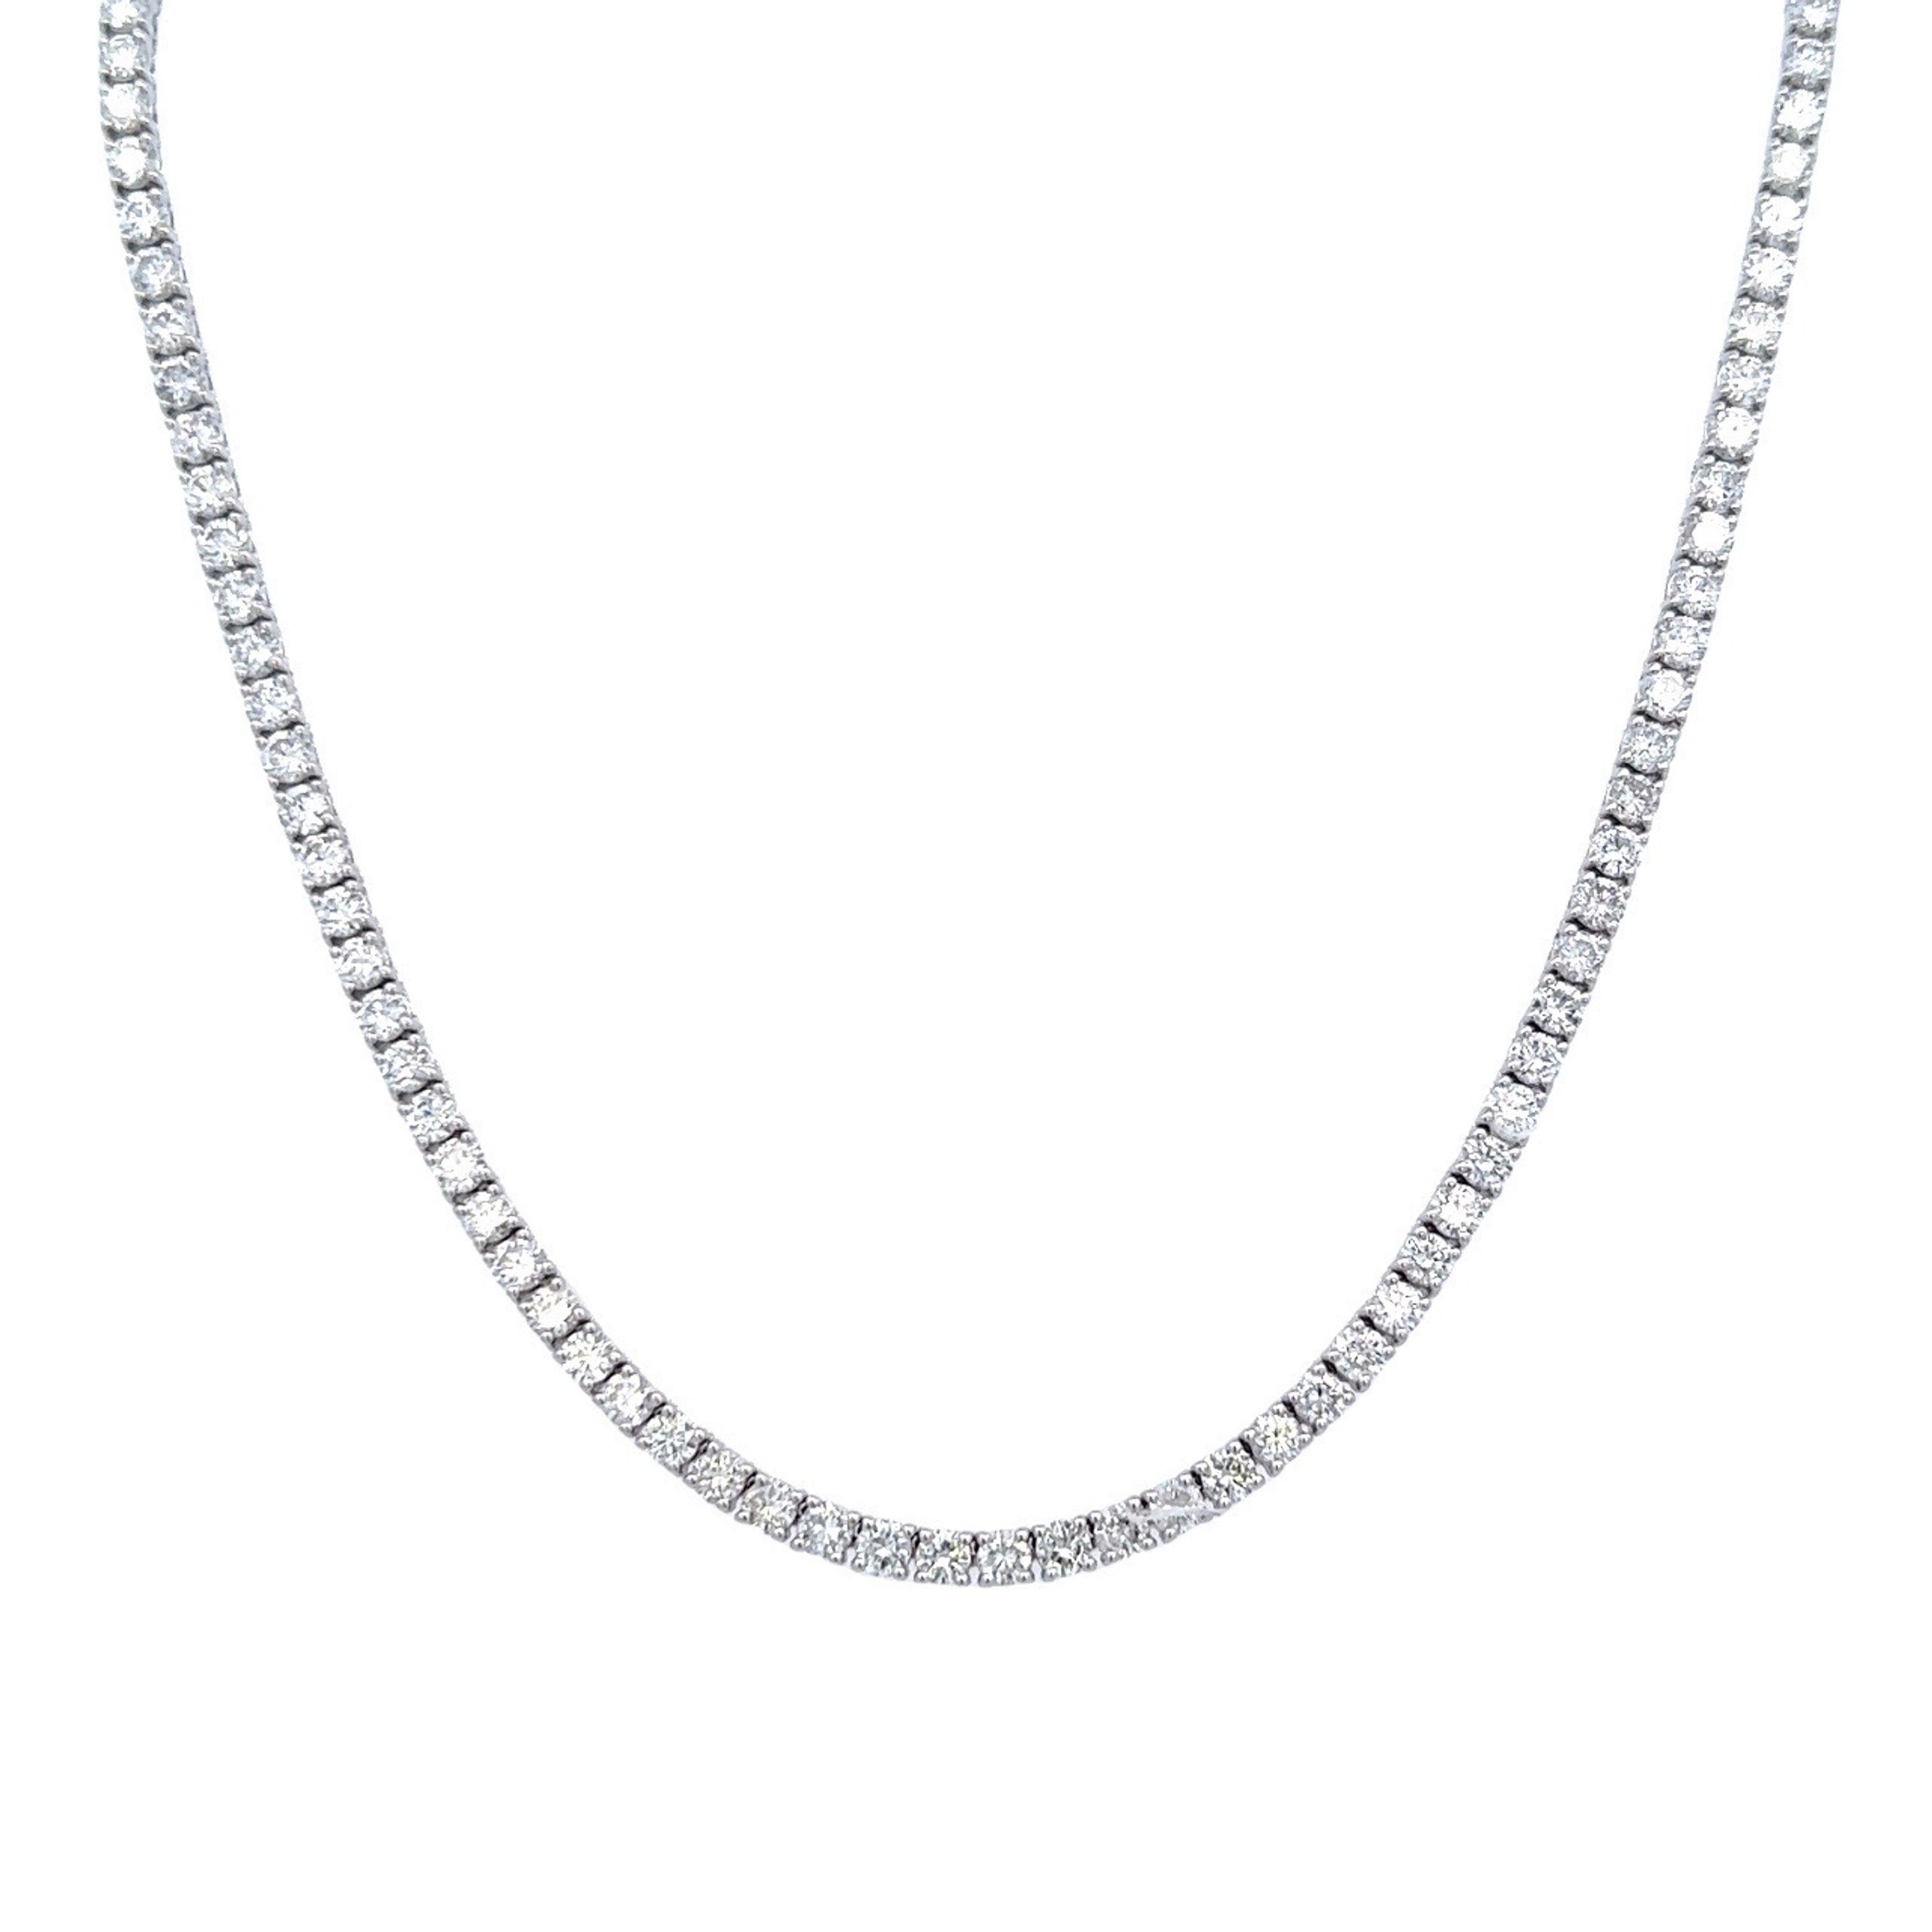 Beautiful and classic diamond tennis riviera necklace, by Alexander Beverly Hills.
150 round brilliant diamonds, 9.10 carats. Approximately E/F color and VS clarity. 18k white gold, 16.37 grams, 16in.
Accommodated with an up-to-date digital